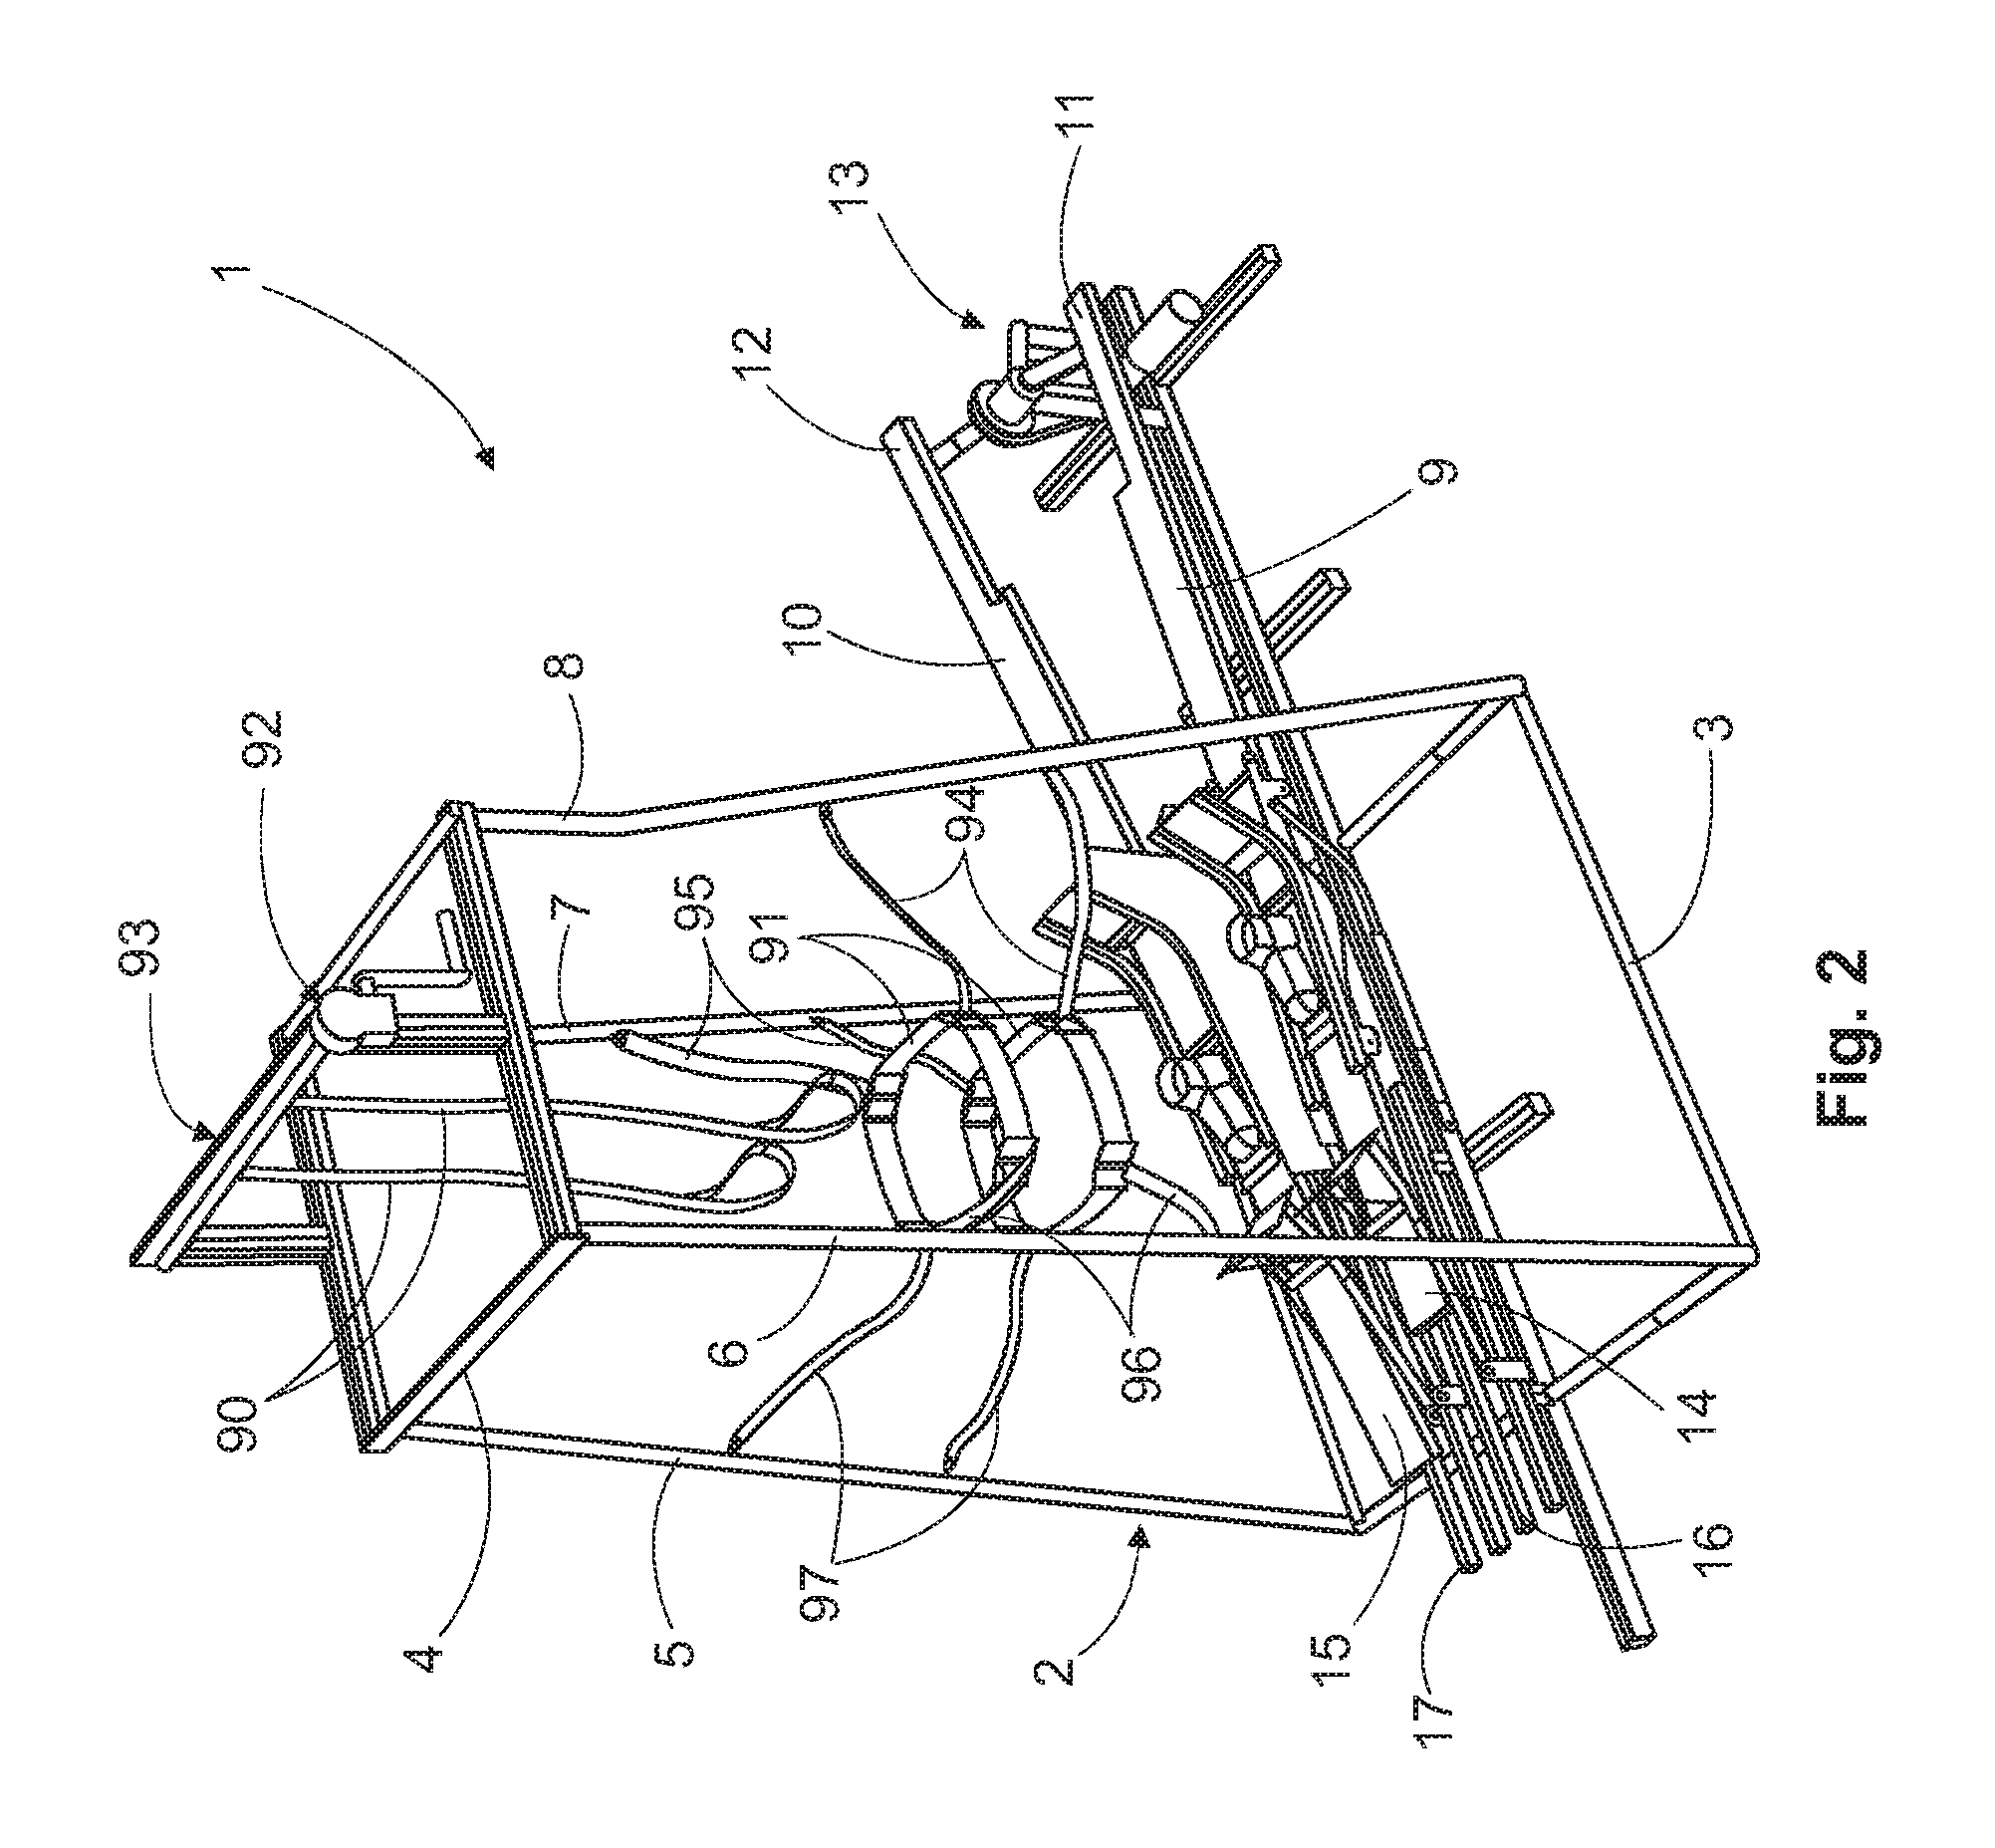 Apparatus for Rehabilitation of Patients Suffering Motor Dysfunction